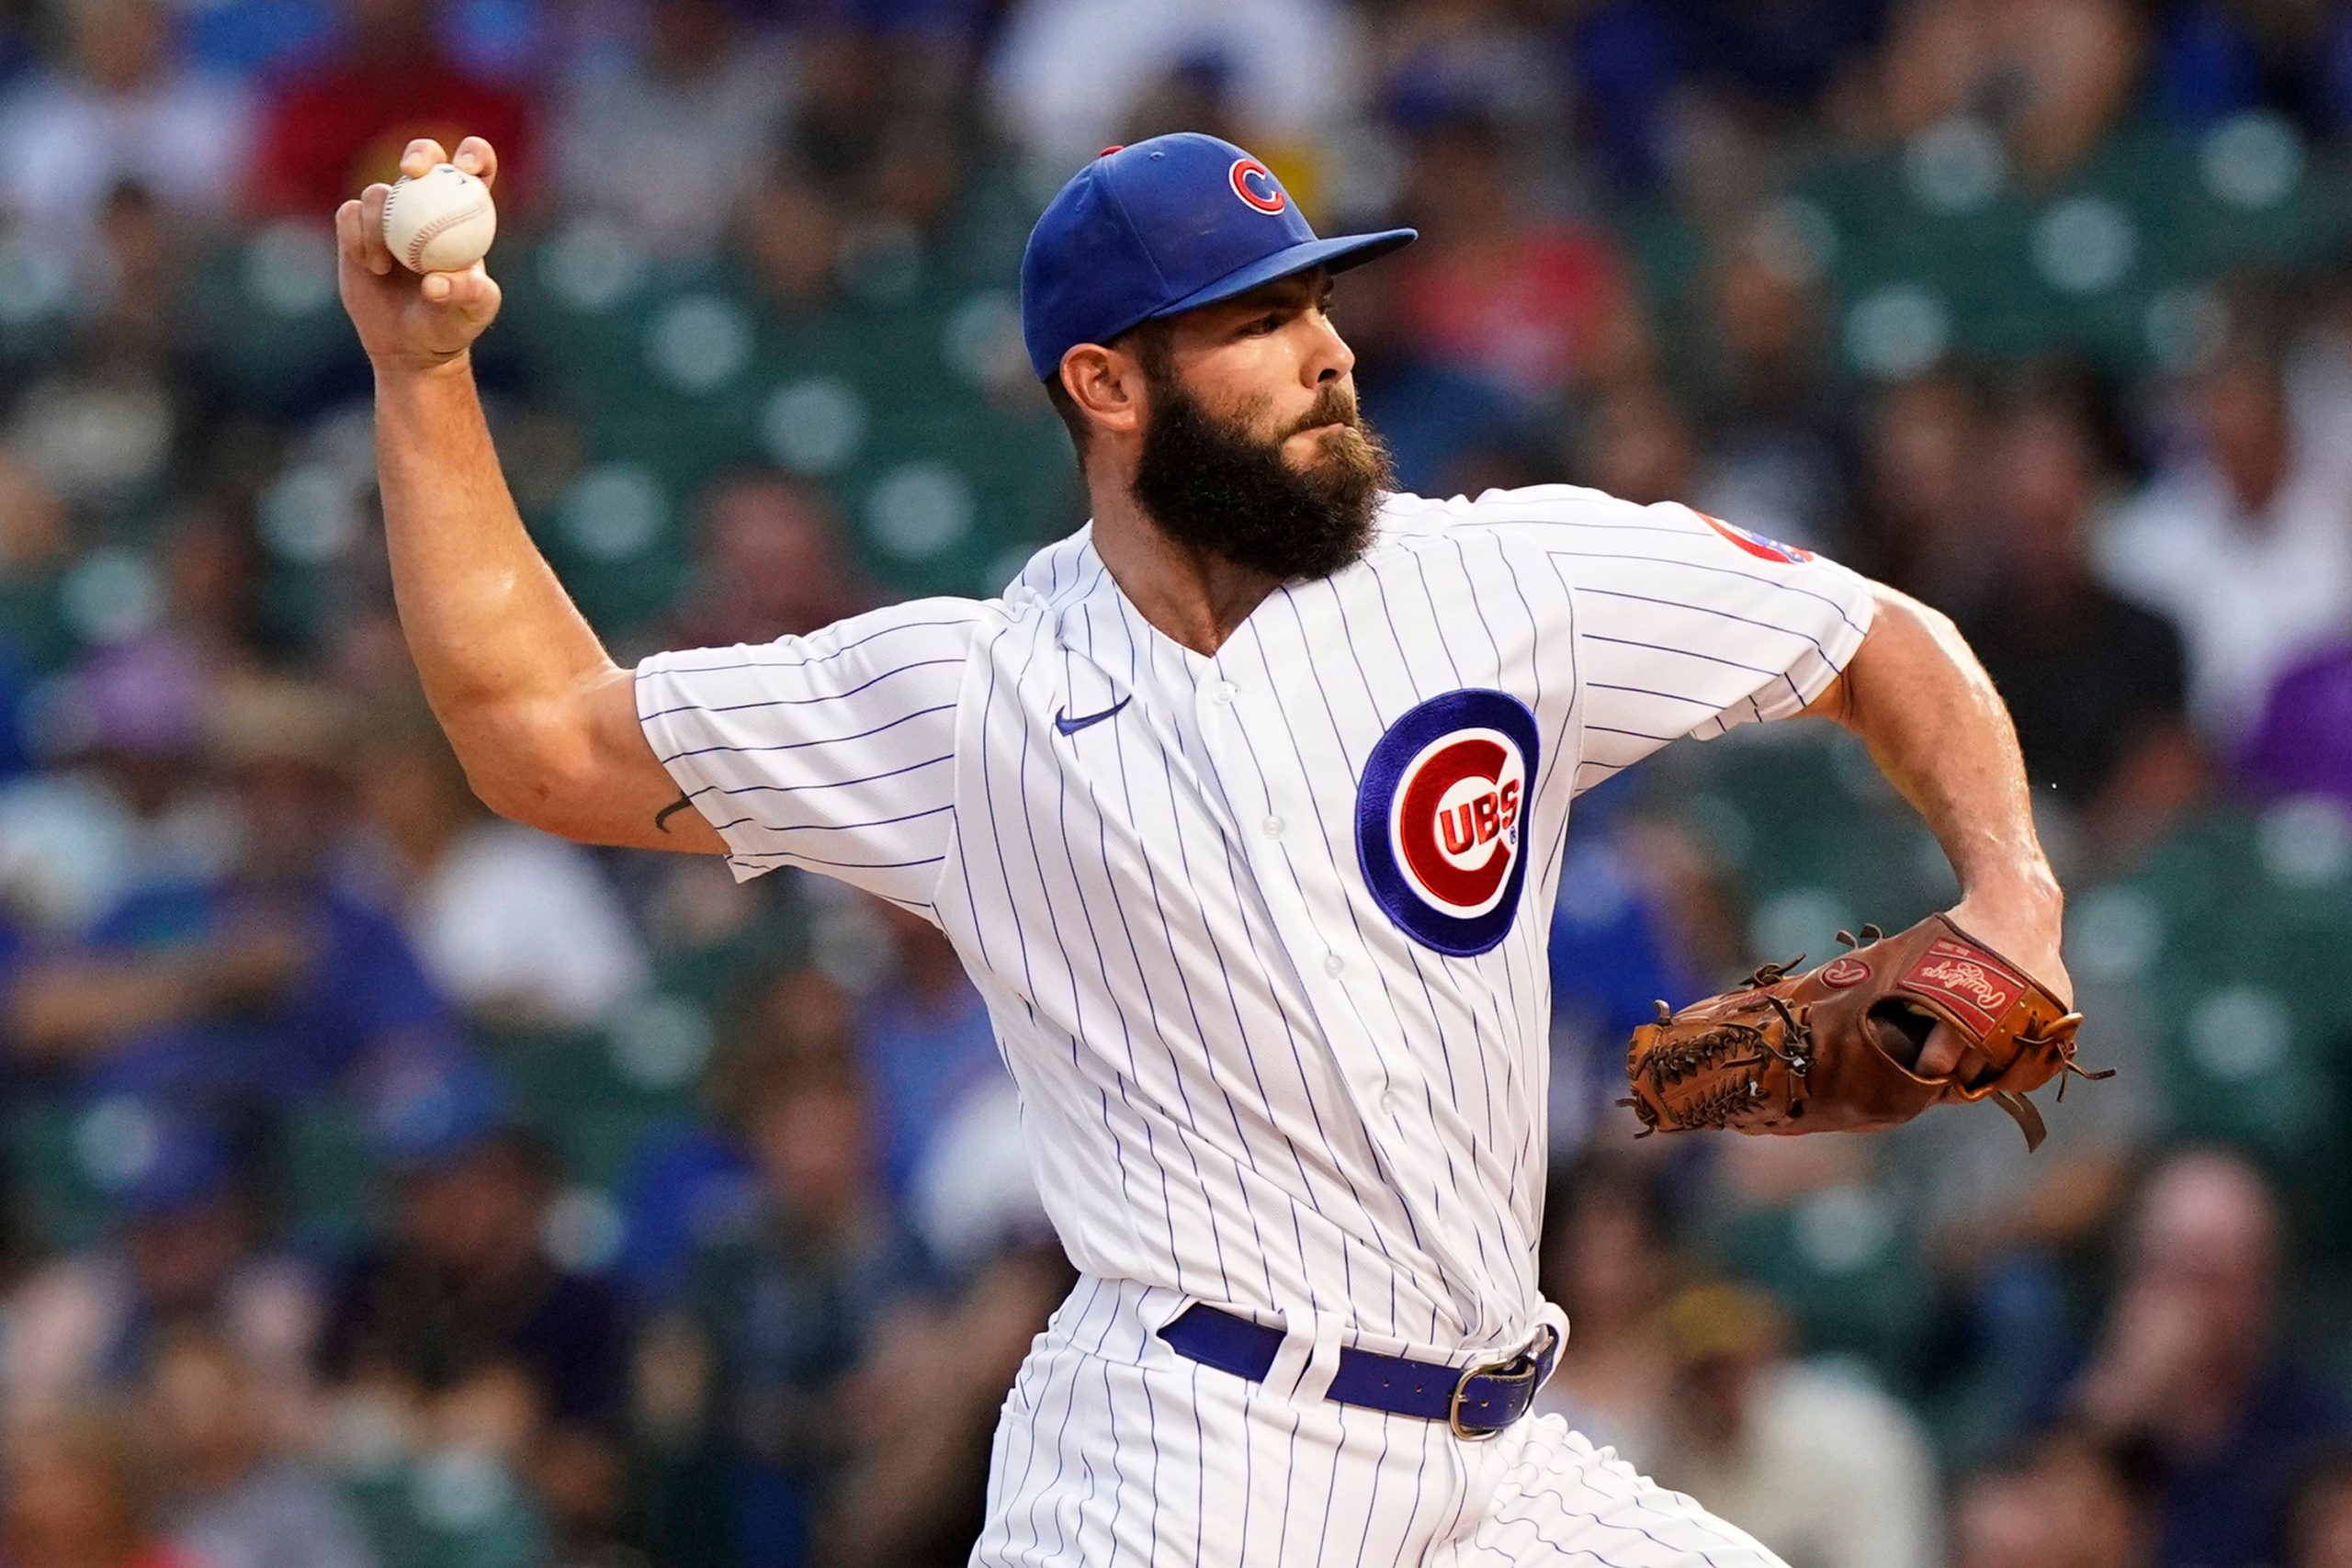 MLB: Jake Arrieta signs a minor league deal with the San Diego Padres